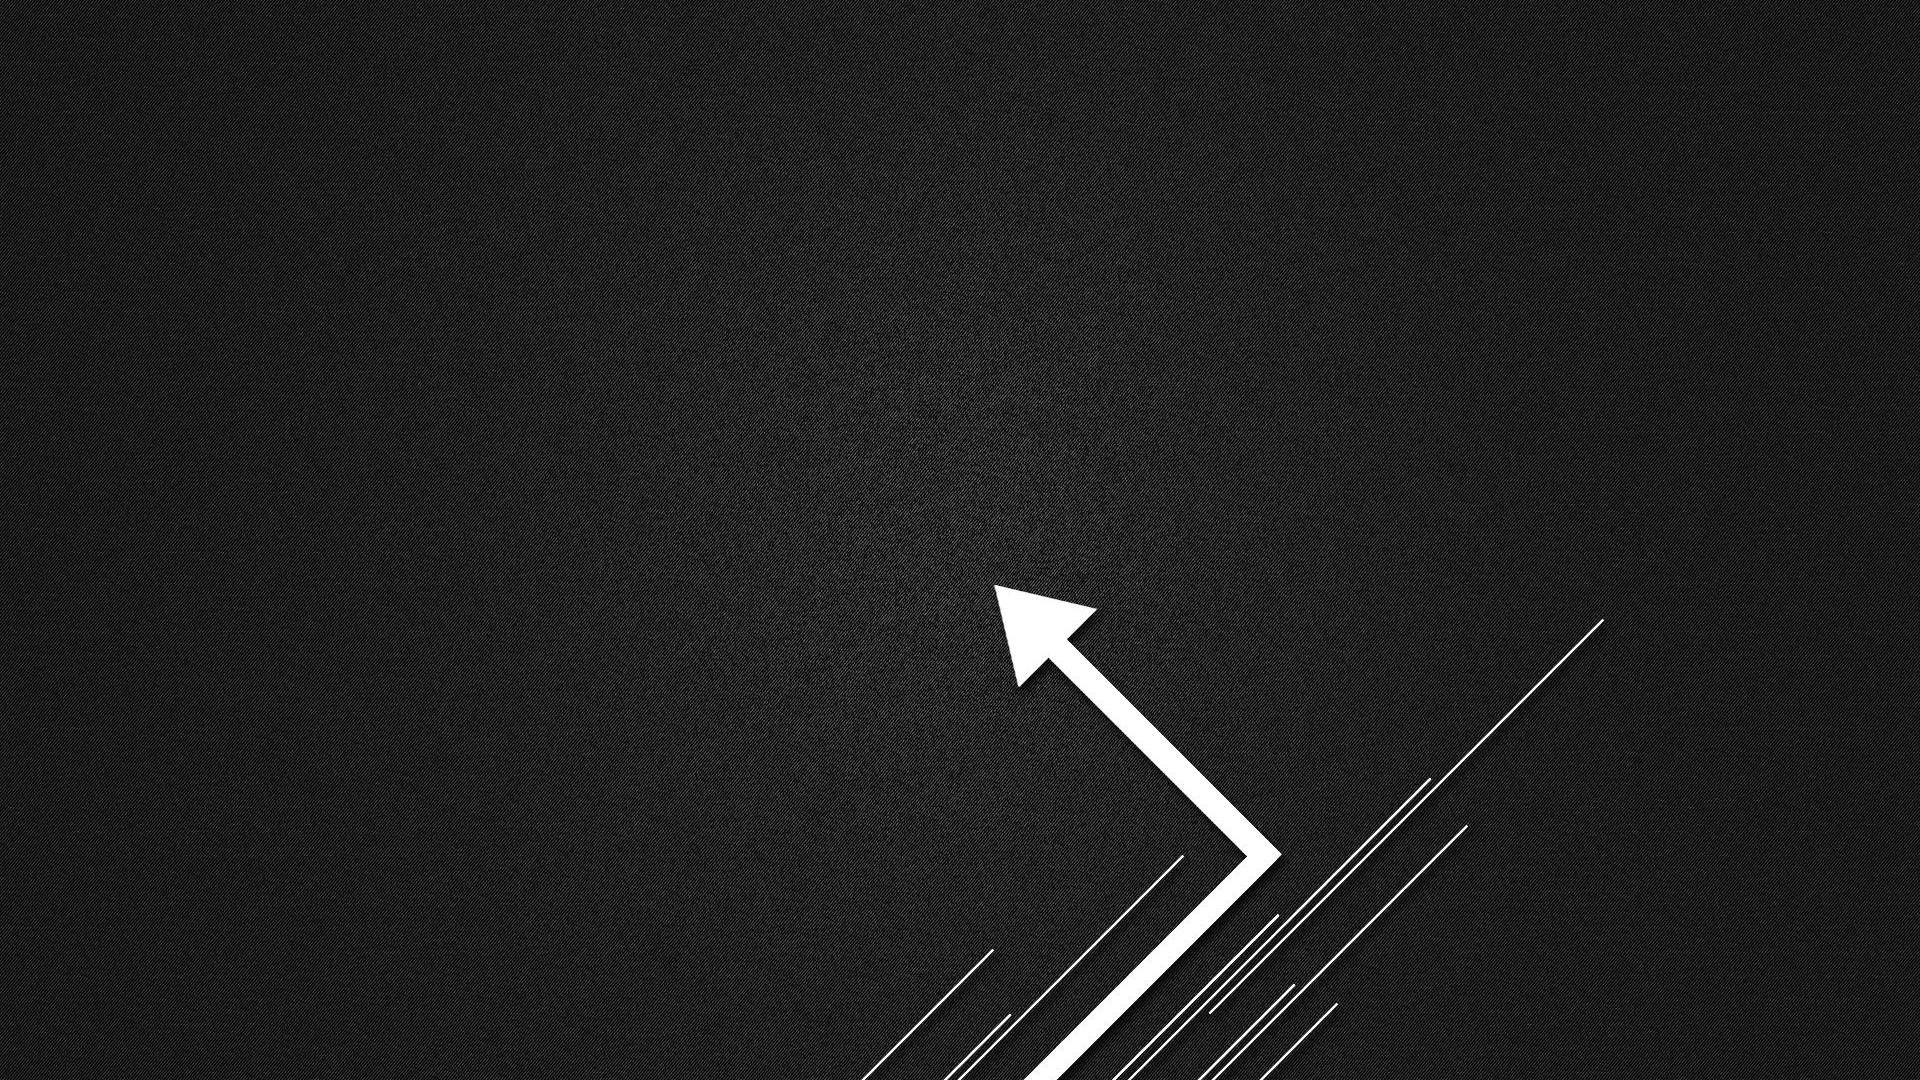 1920x1080 Vector Arrow Label Design Black And White Backgrounds Widescreen .